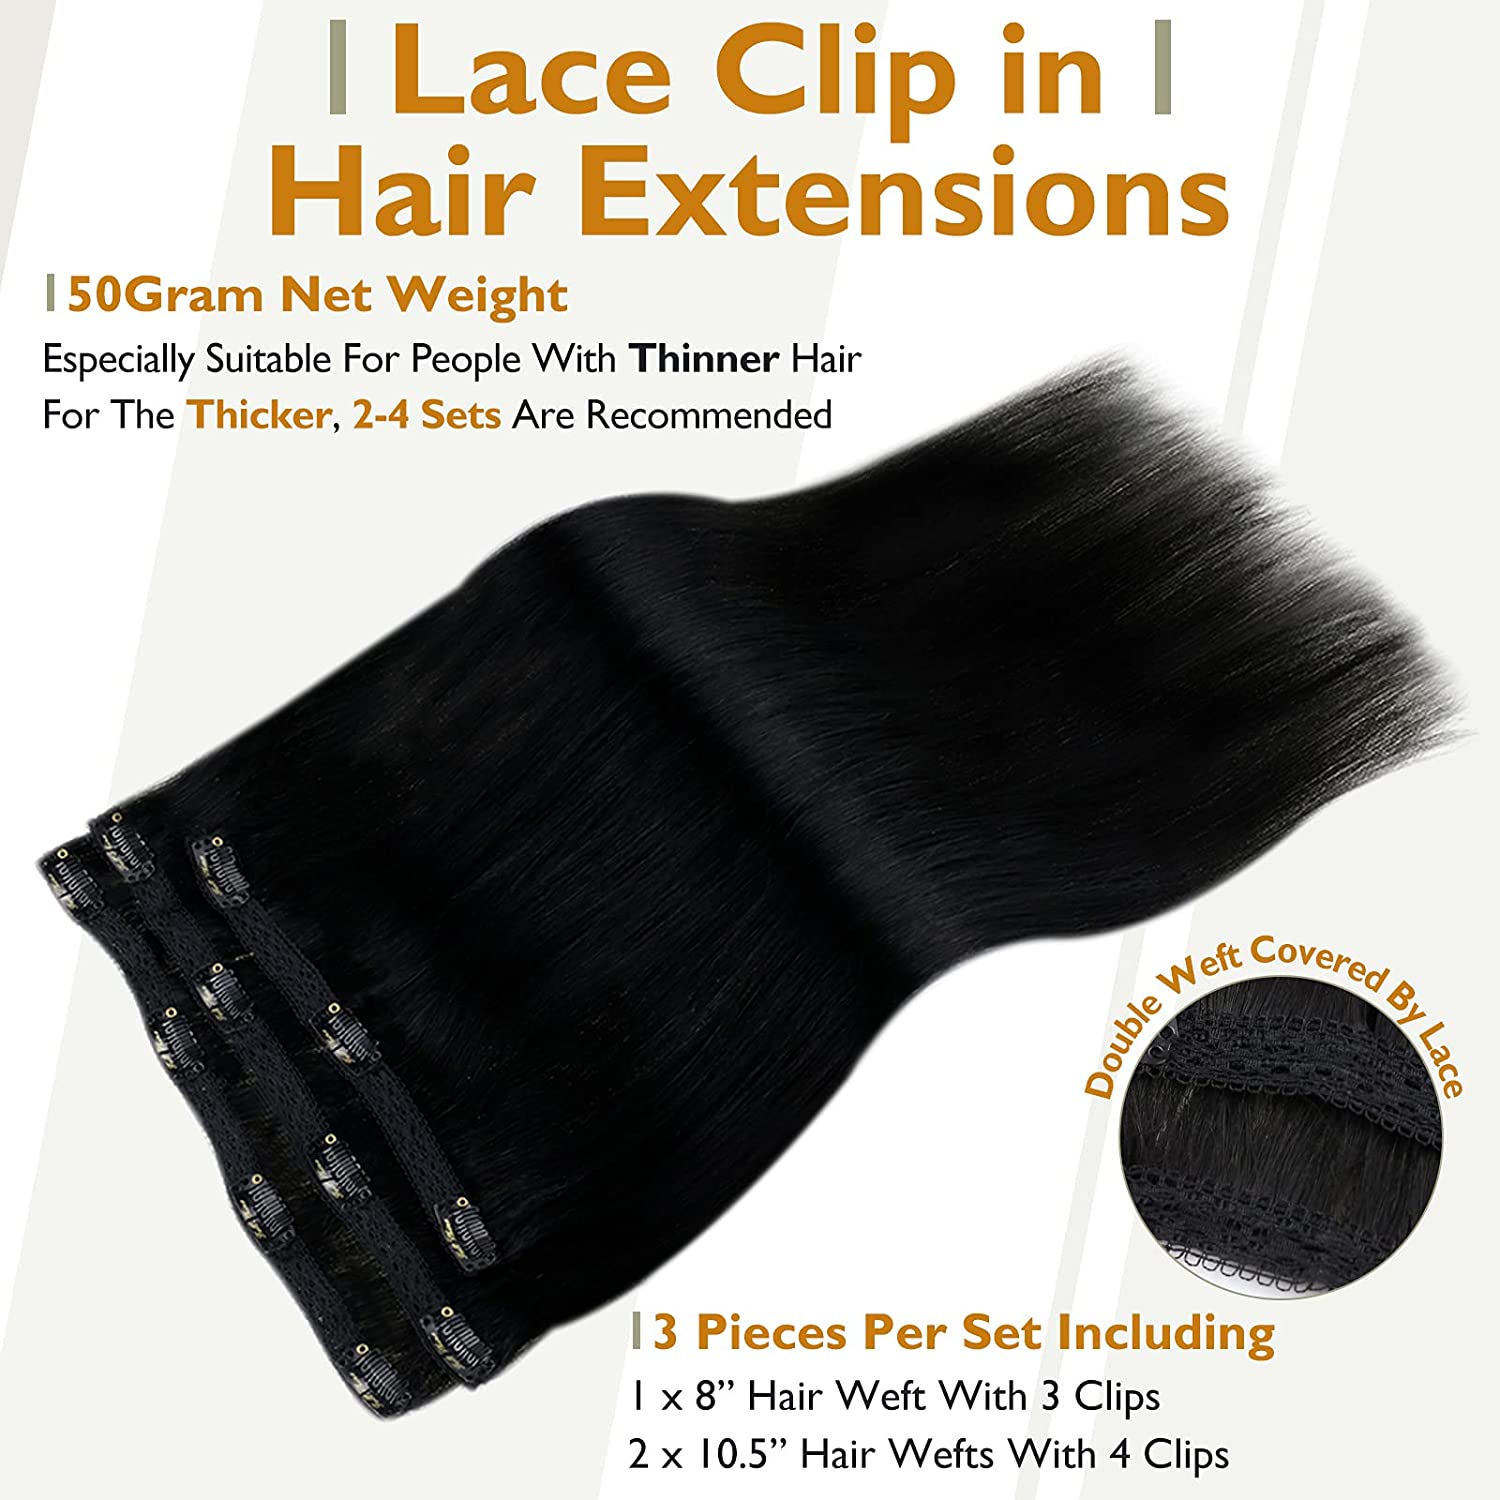 FShine Lace Clip In Hair Extensions Clip in Hair Extensions #1 - FShine Shop